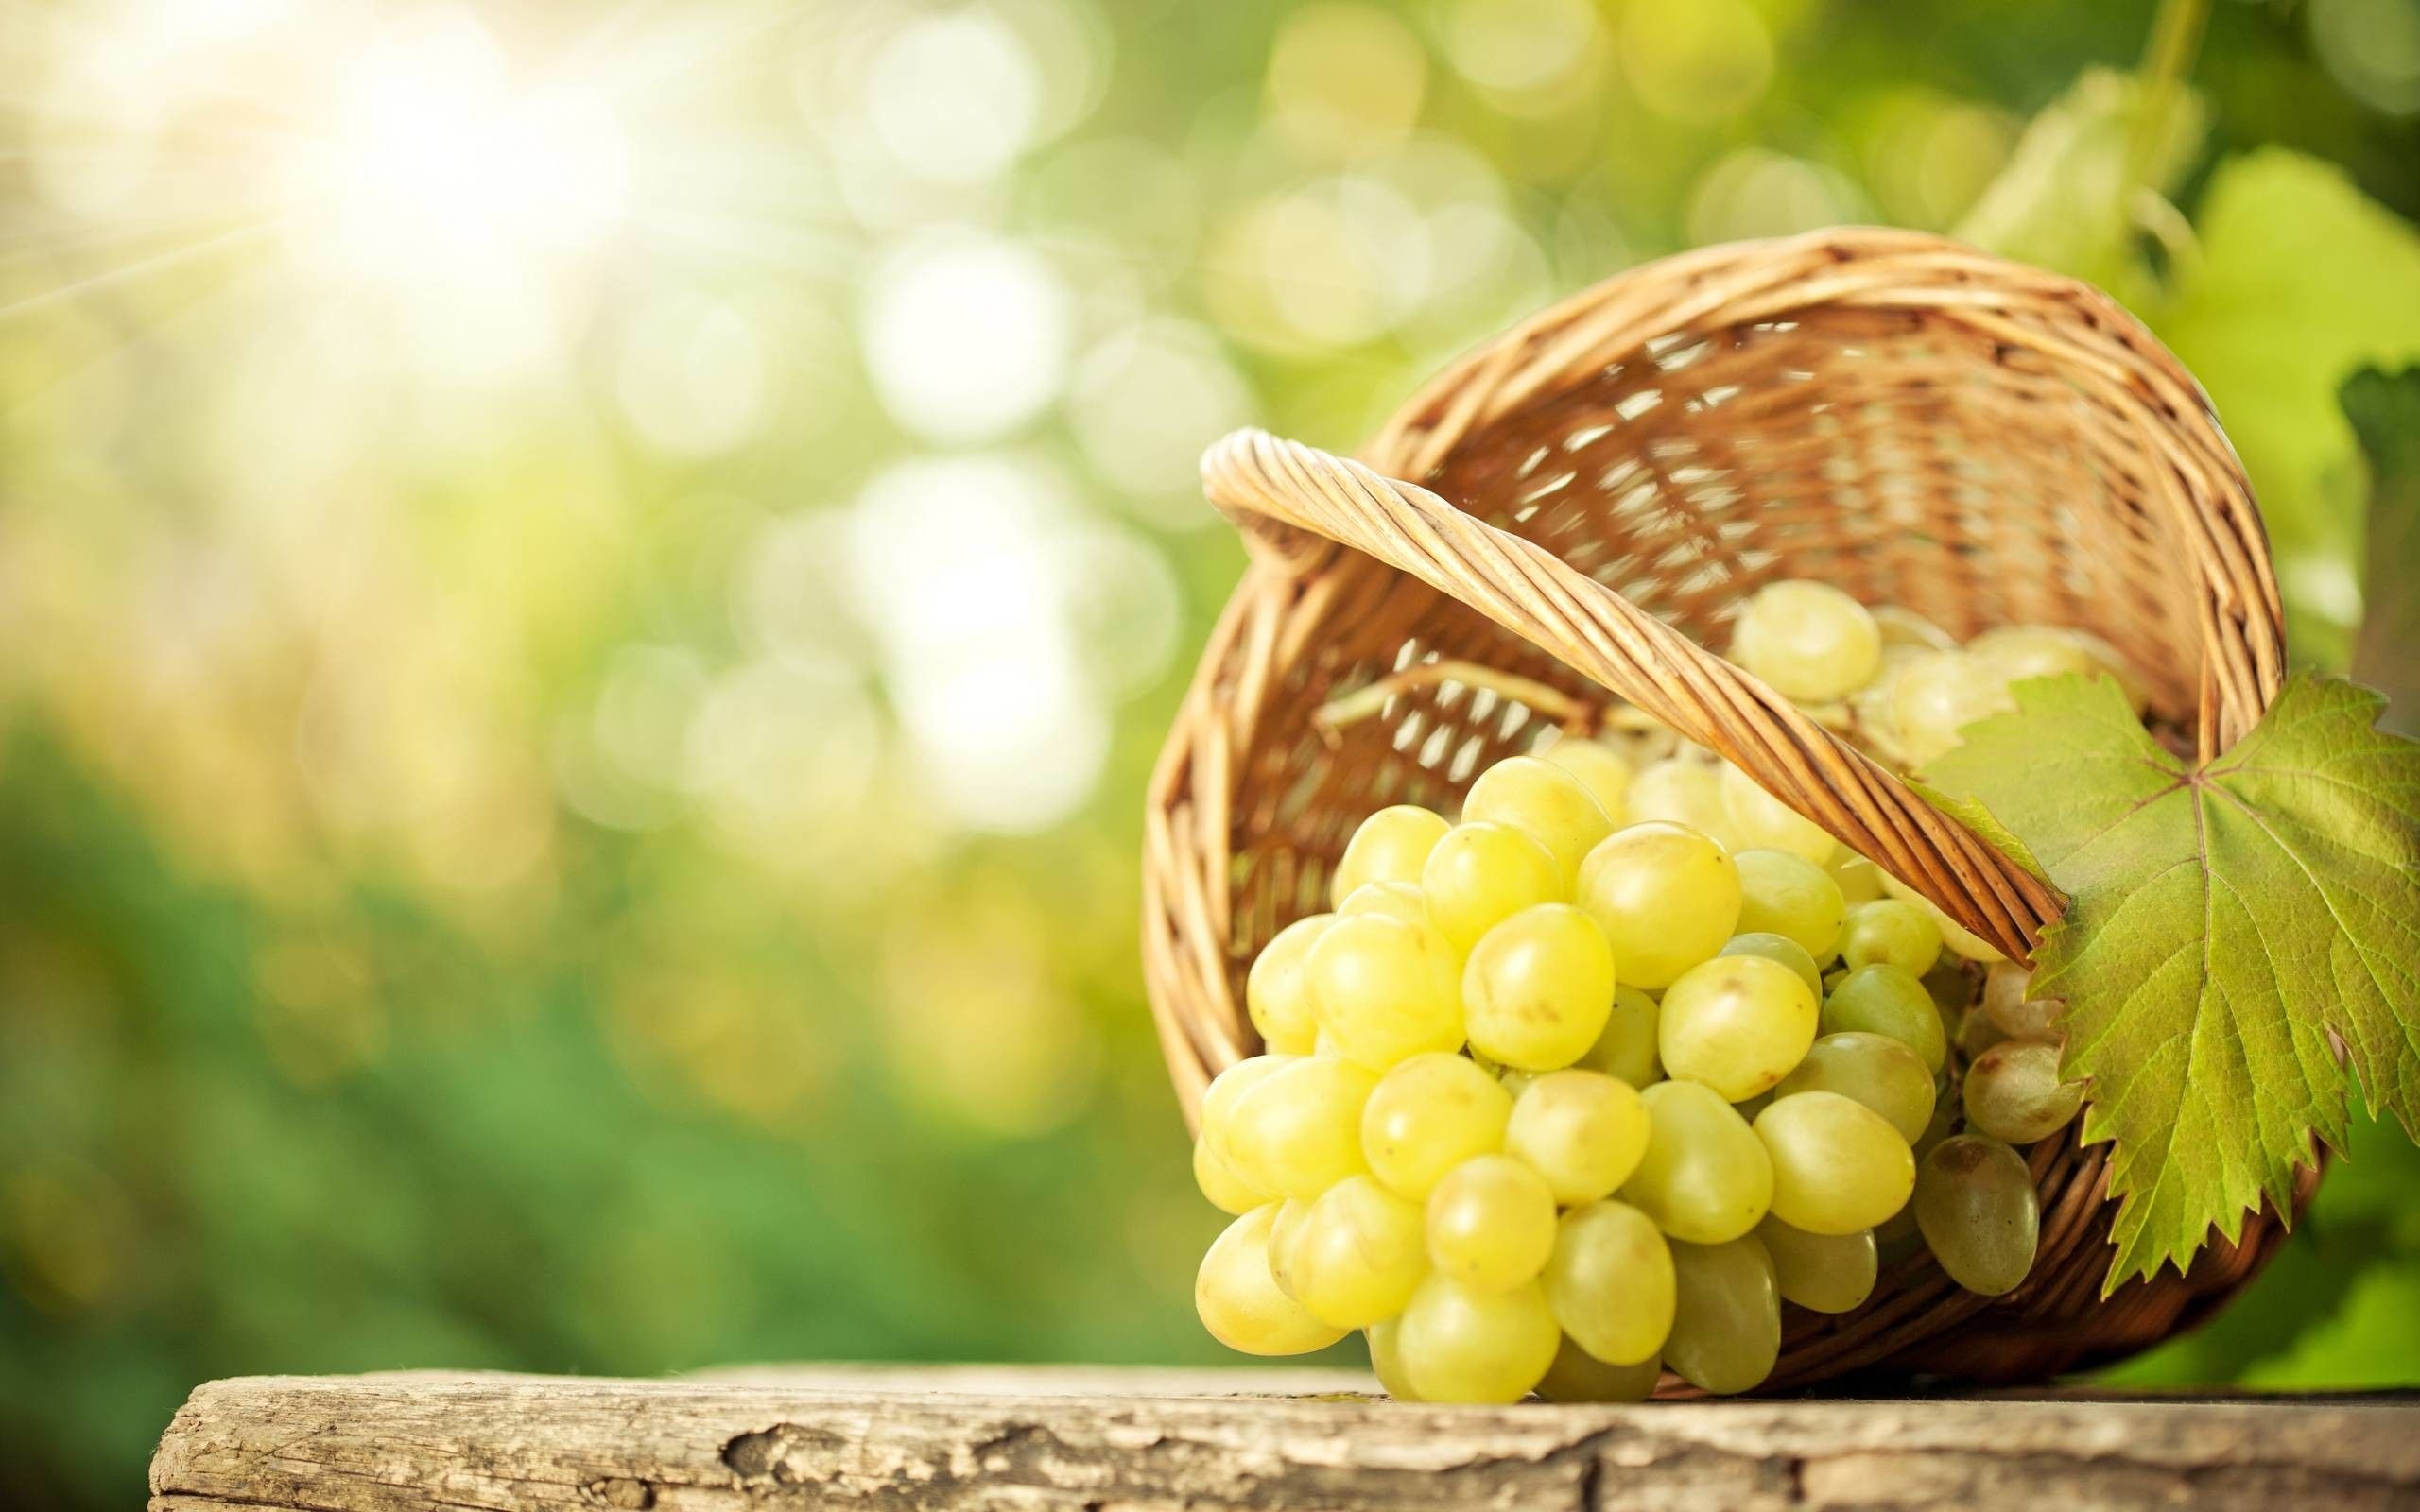 Grapes: Suitable for people with diabetes, as long as they are accounted for in the diet plan. 2560x1600 HD Background.